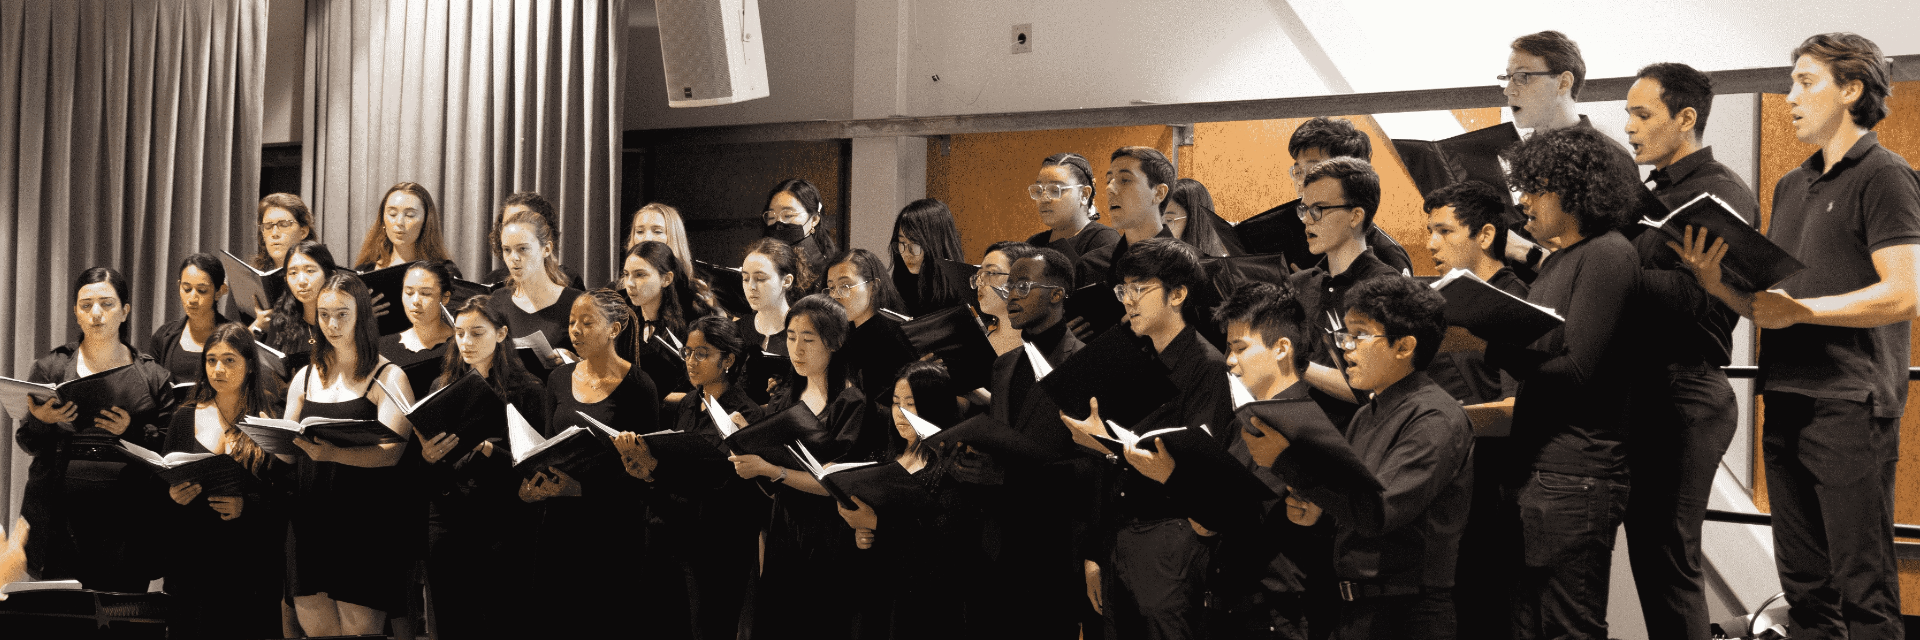 A picture of the chorale singing